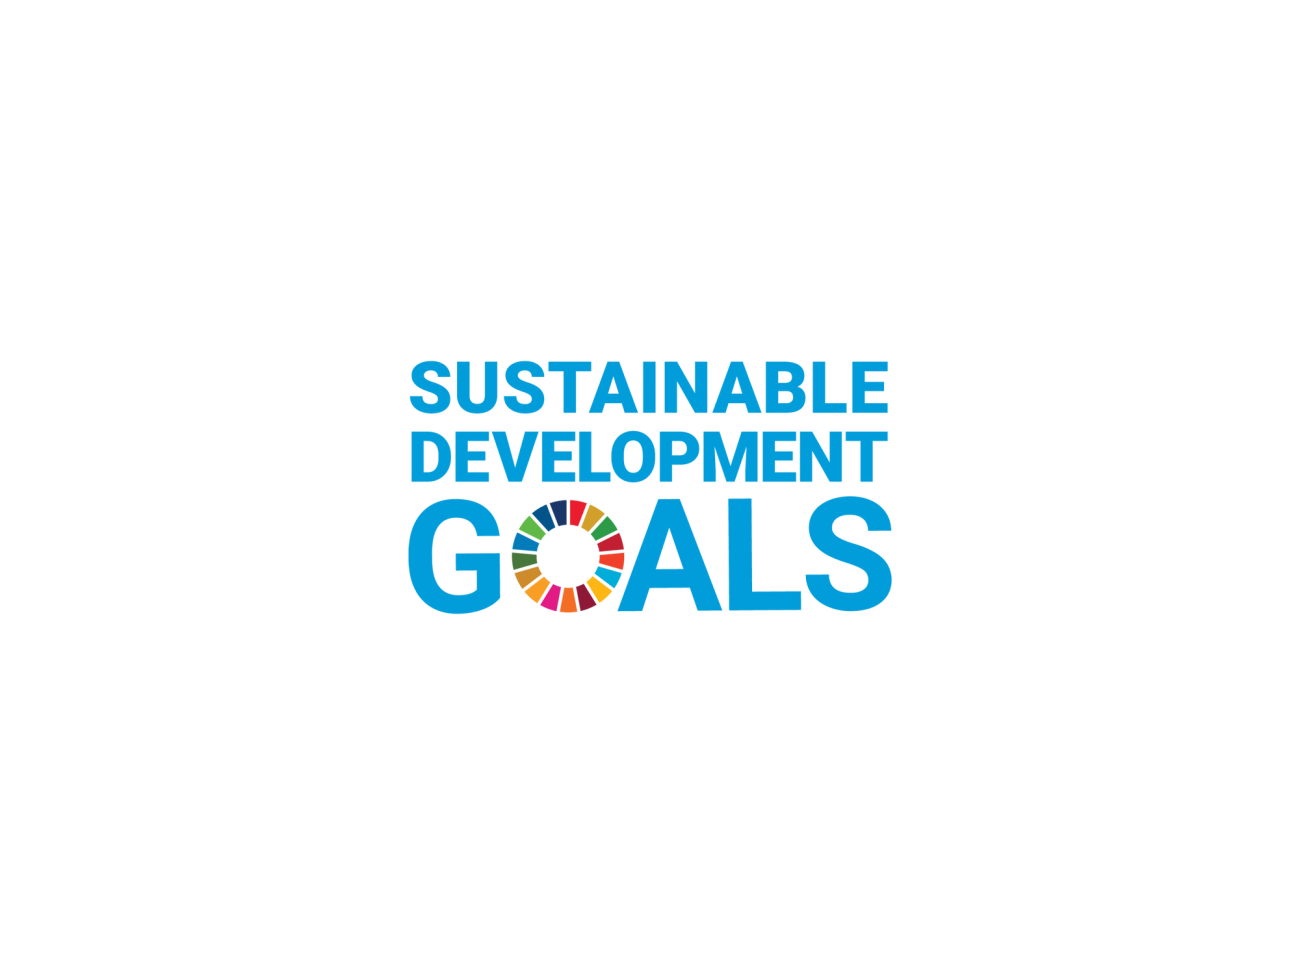 SDG logo, blue letters reading "Susteinable Development Goals", the letter O in goals is made up of a colour scale